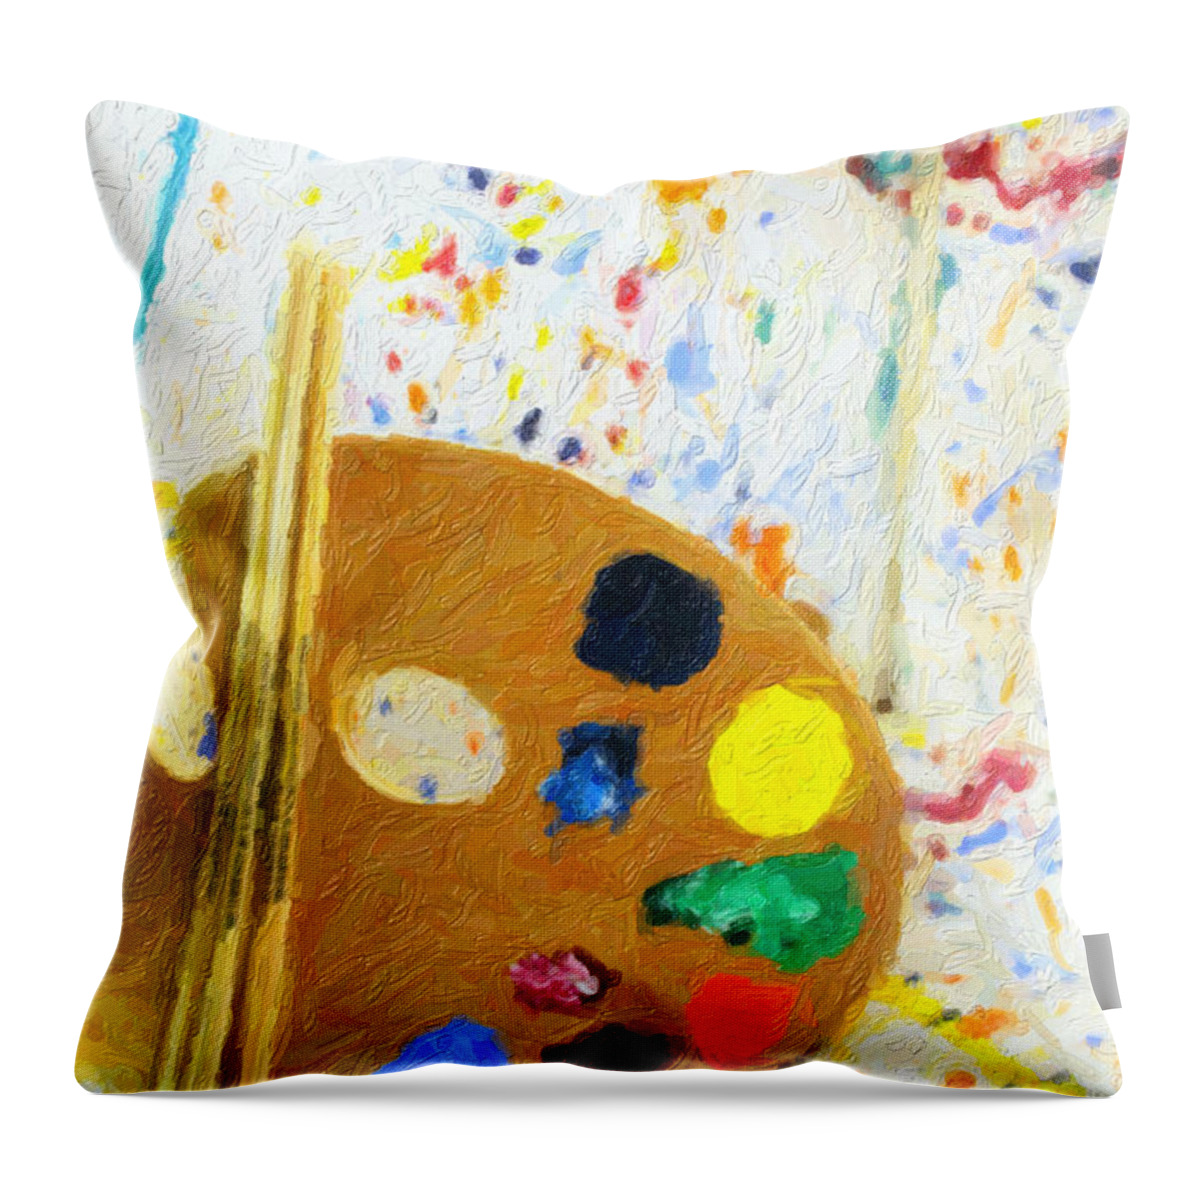 Easel Throw Pillow featuring the digital art Artists Easel And Splatter by Gravityx9 Designs